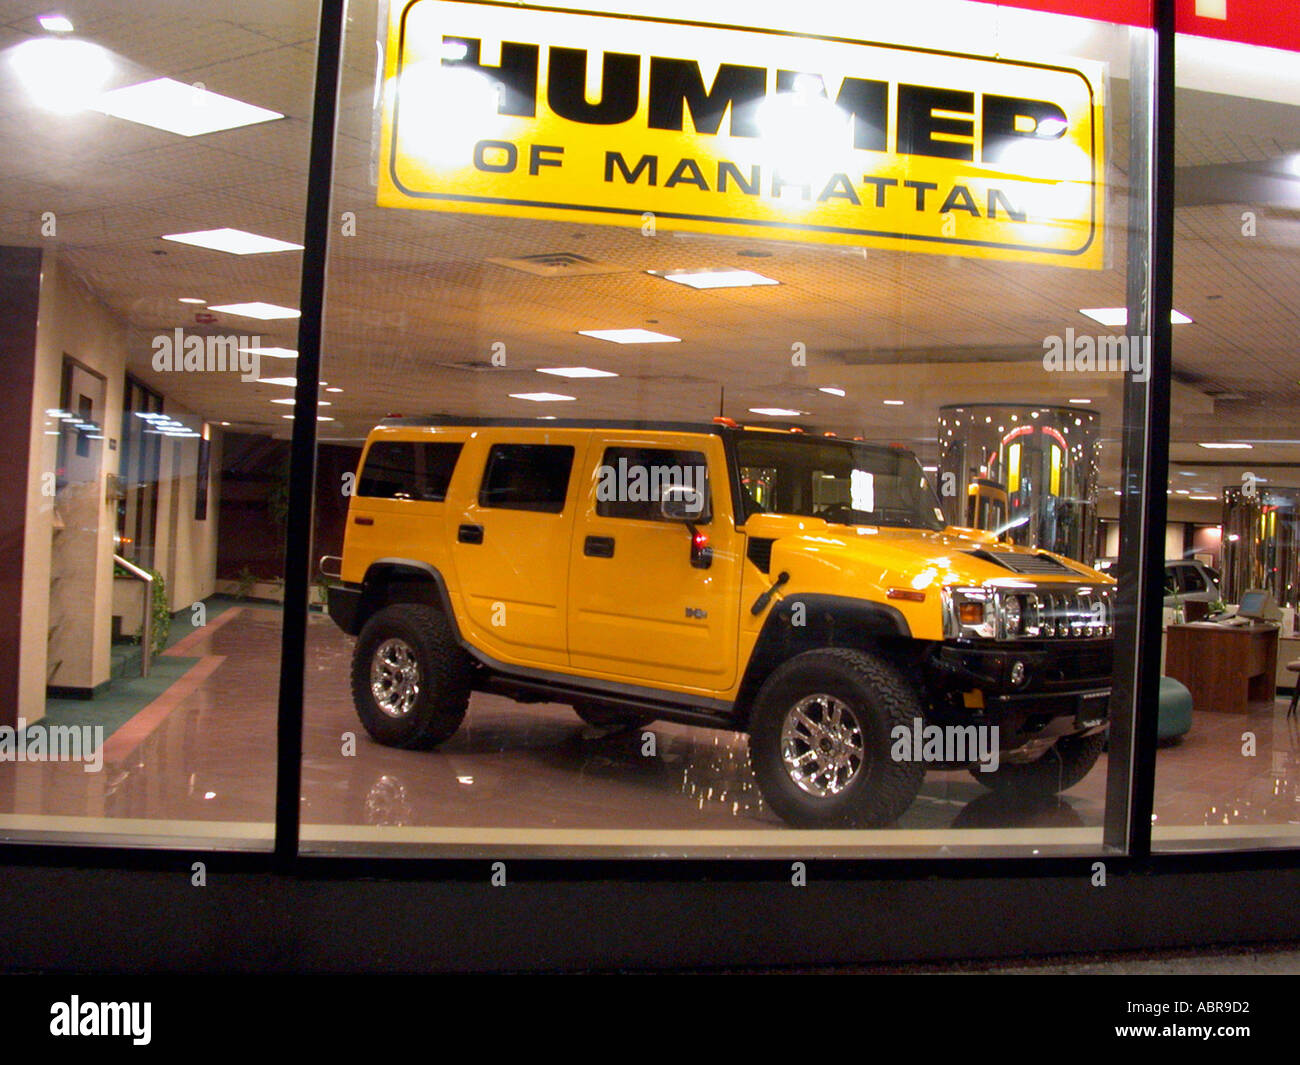 A brand new Hummer H2 sits in the Hummer of Manhattan dealership Despite it s fuel economy of only an estimated 13 mpg in the city and at 8 000 pounds fully loaded the H2 a smaller version of the original H1 has been selling fairly well to a combination of men and women Stock Photo